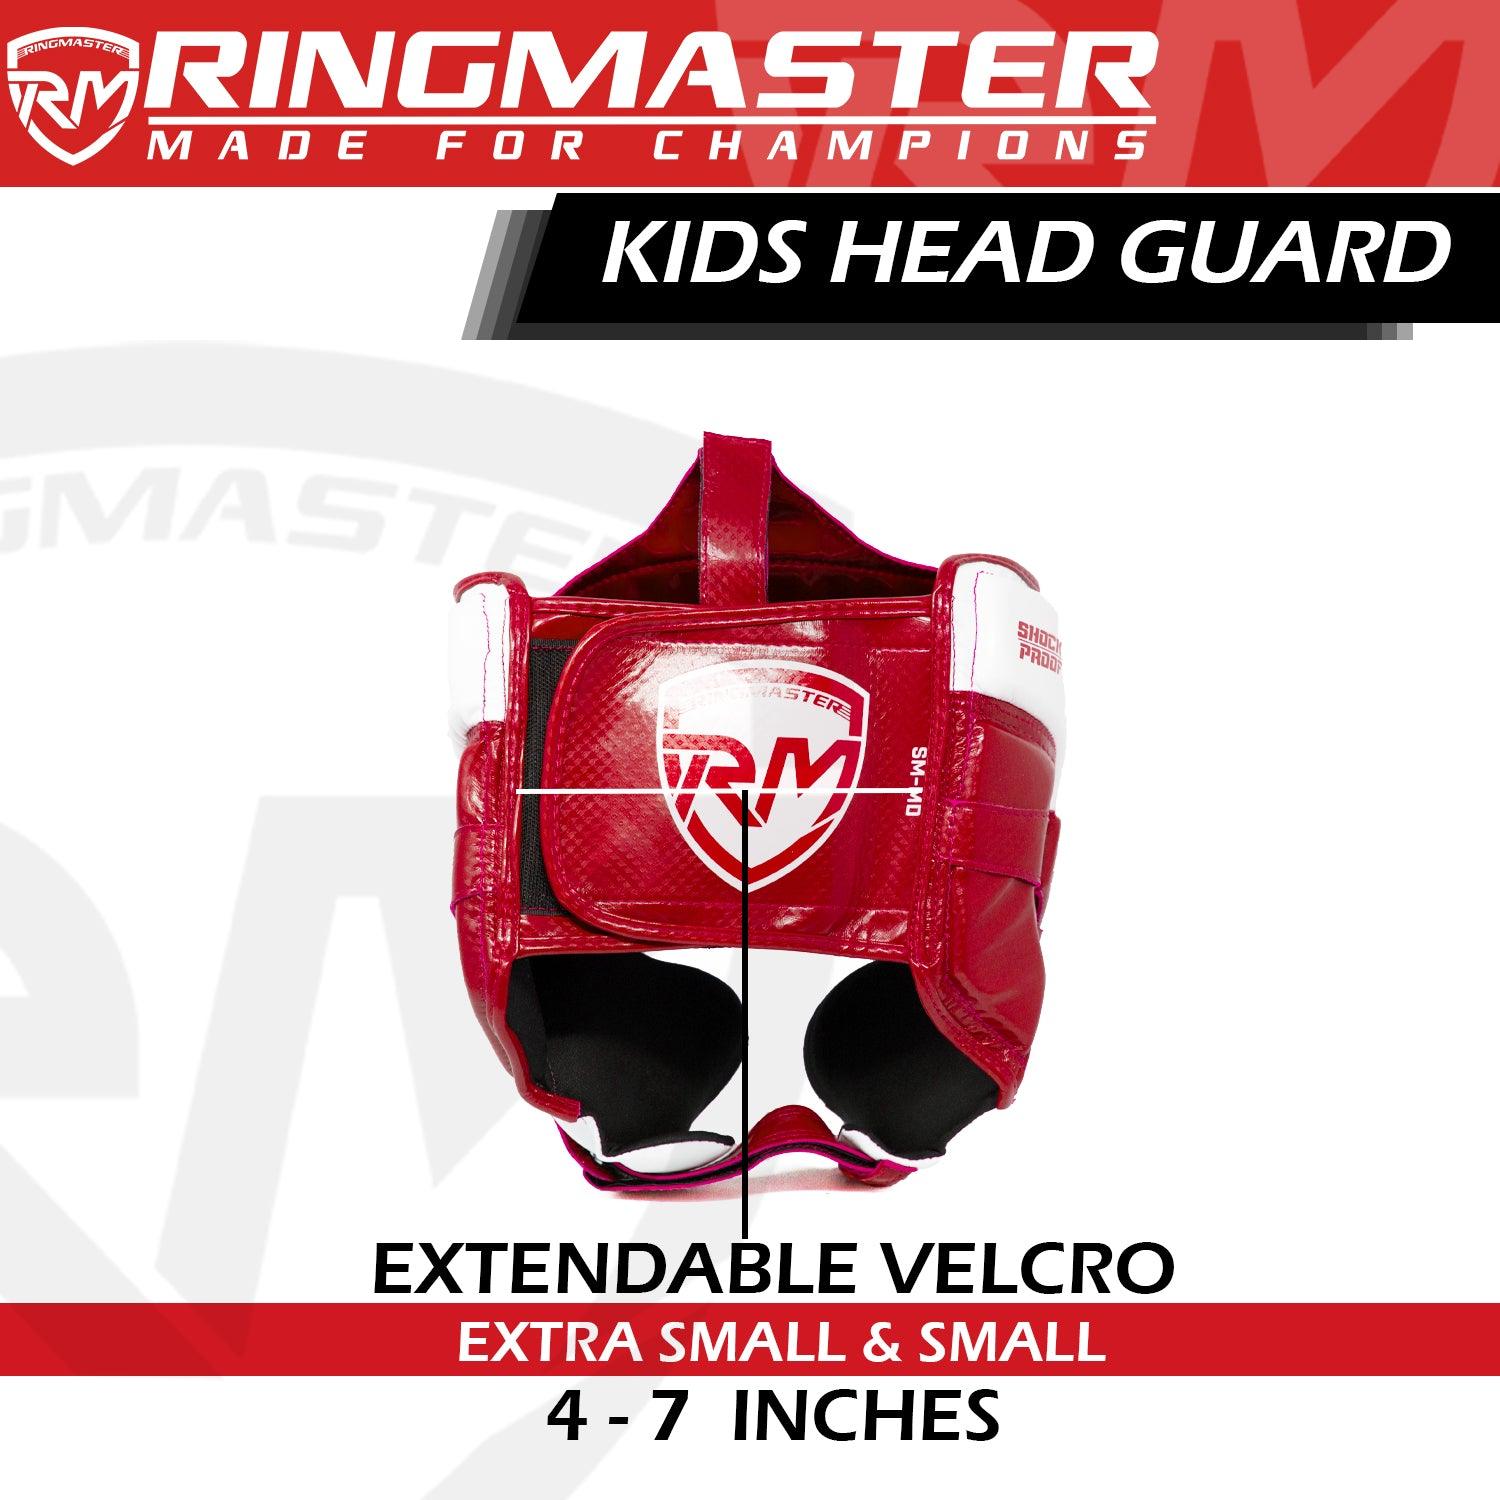 Junior Head Guard Boxing, Head Guard Red and white Kids headguards boxing, best junior boxing head guard, Kids Headguards, head guard, boxing head guard, taekwondo head guard, karate head guard, taekwondo head guard price, taekwondo white head guard, Ringmaster Sports Head guard, Ringmaster Sports Equipment, Ringmaster boxing Equipment, RingMaster Sports Kids Boxing HeadGuard Red and White image 4